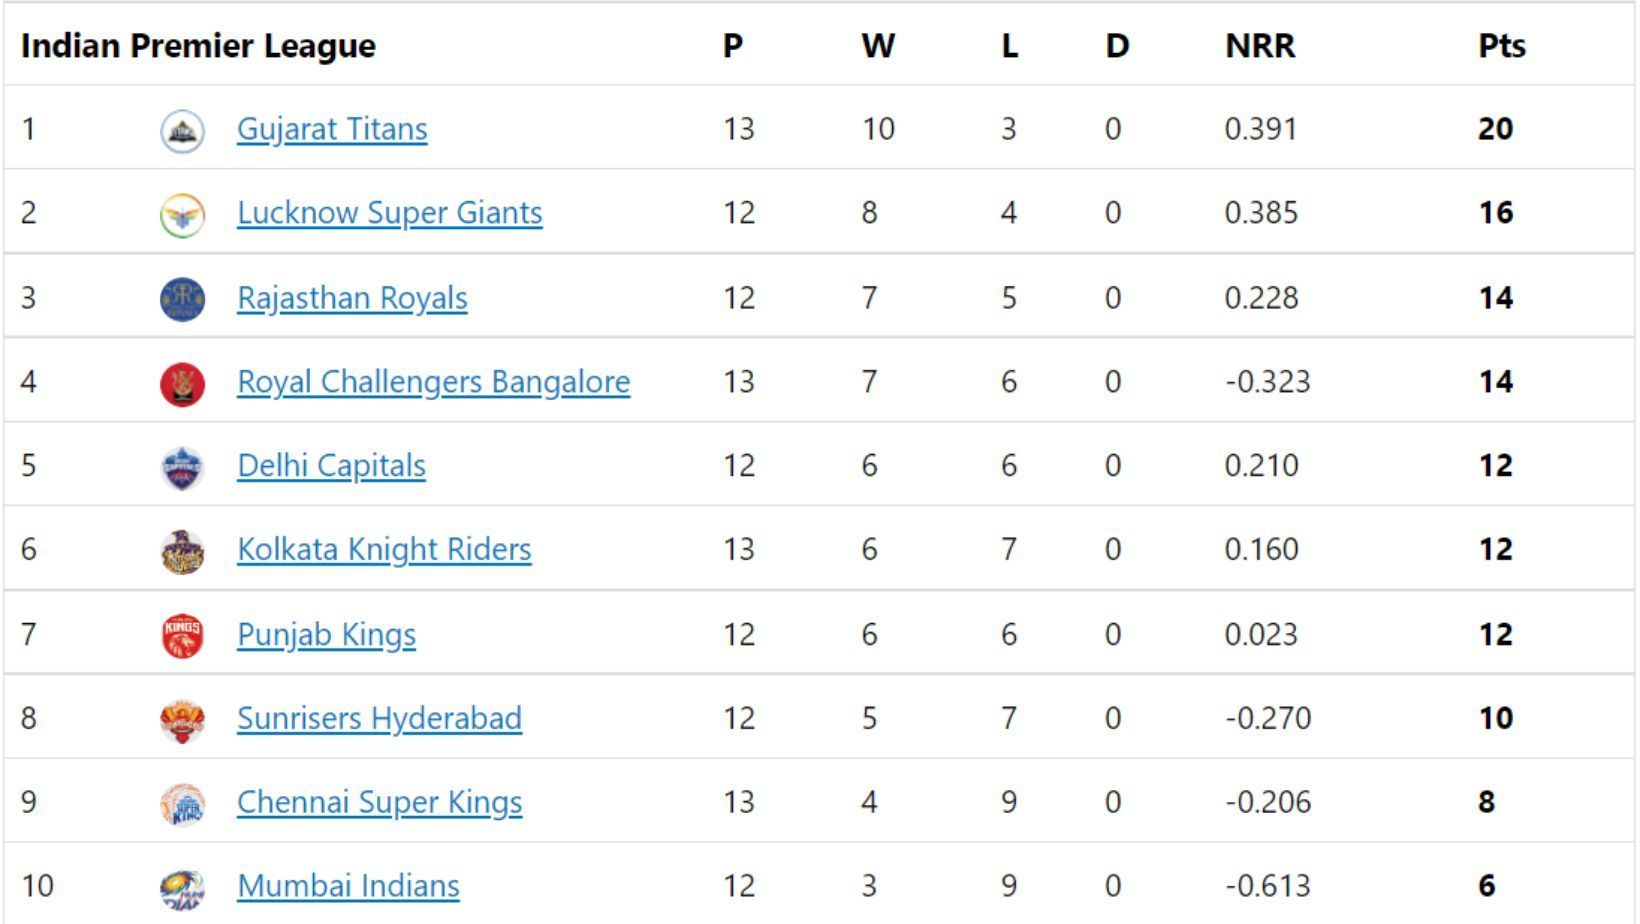 Gujarat Titans become the first team to reach 20 points in IPL 2022.